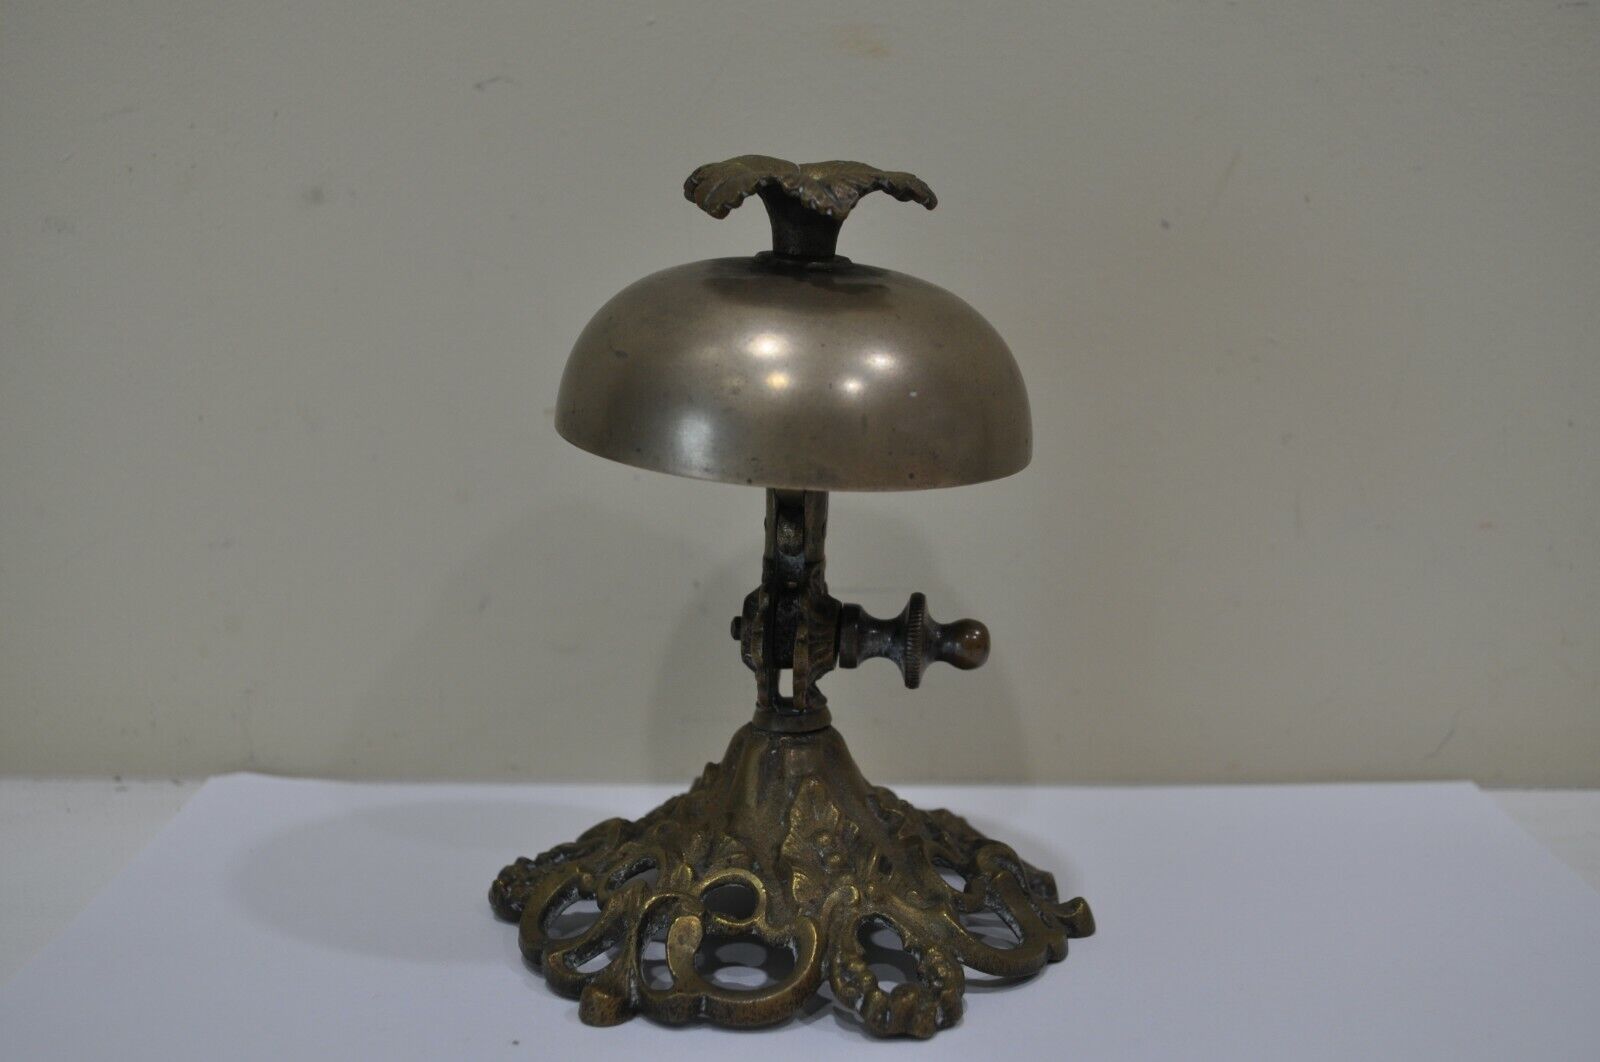 Rare ANTIQUE BRASS TABLE BELL